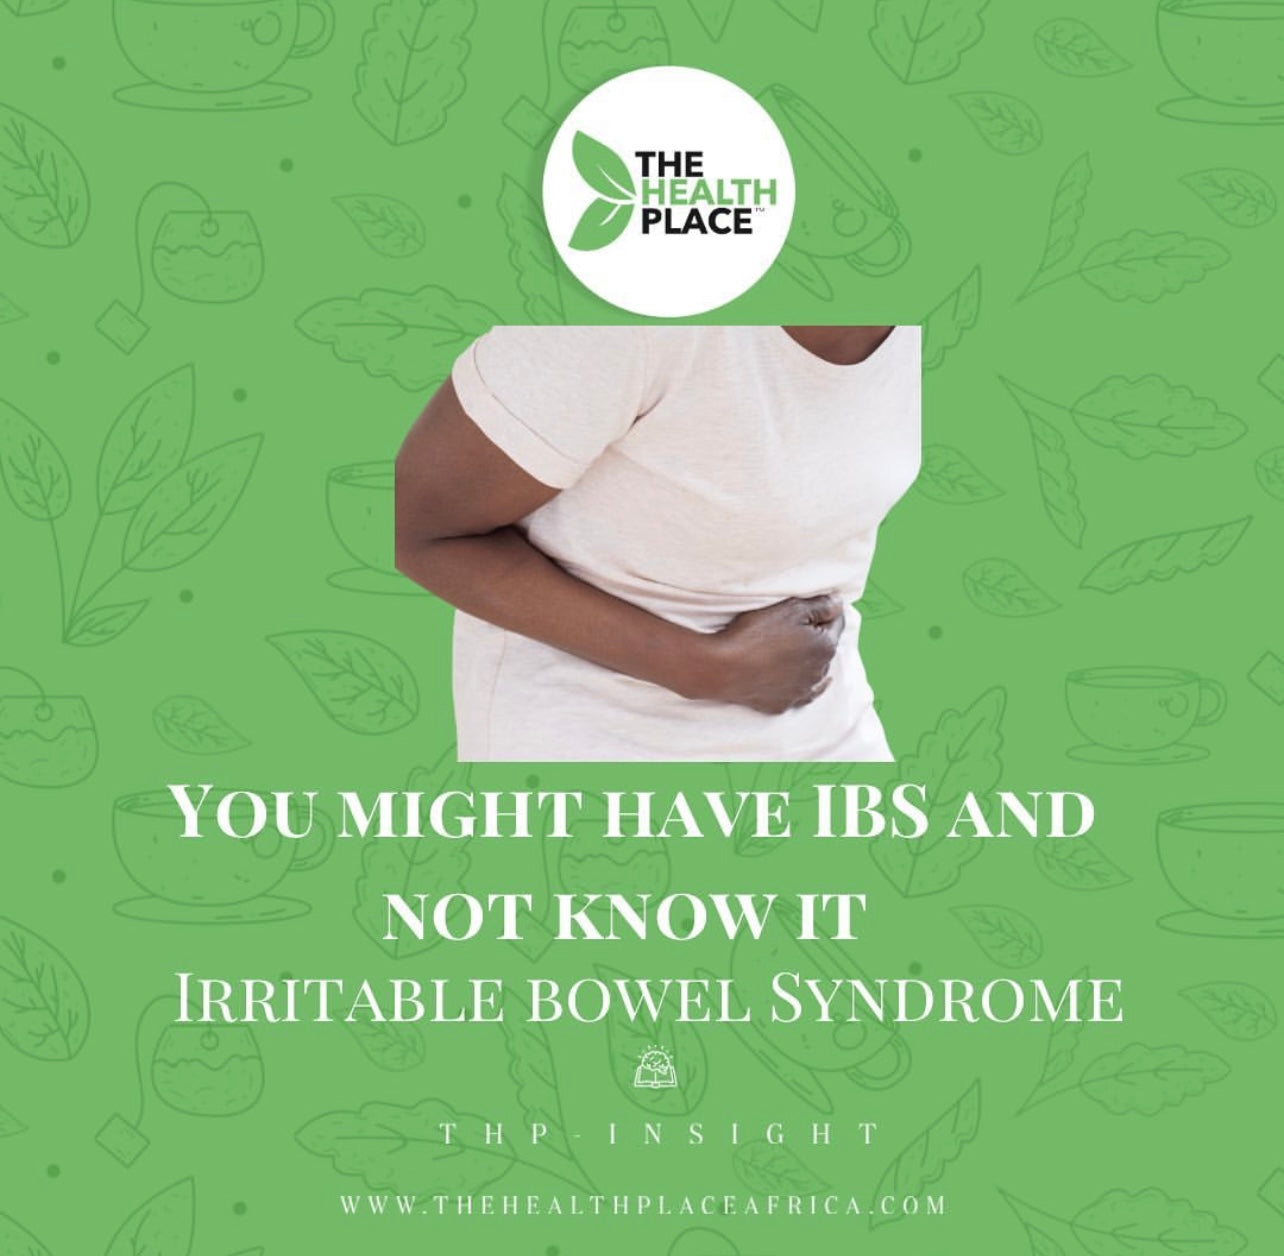 YOU MIGHT HAVE IRRITABLE BOWEL SYNDROME (IBS) AND NOT KNOW IT